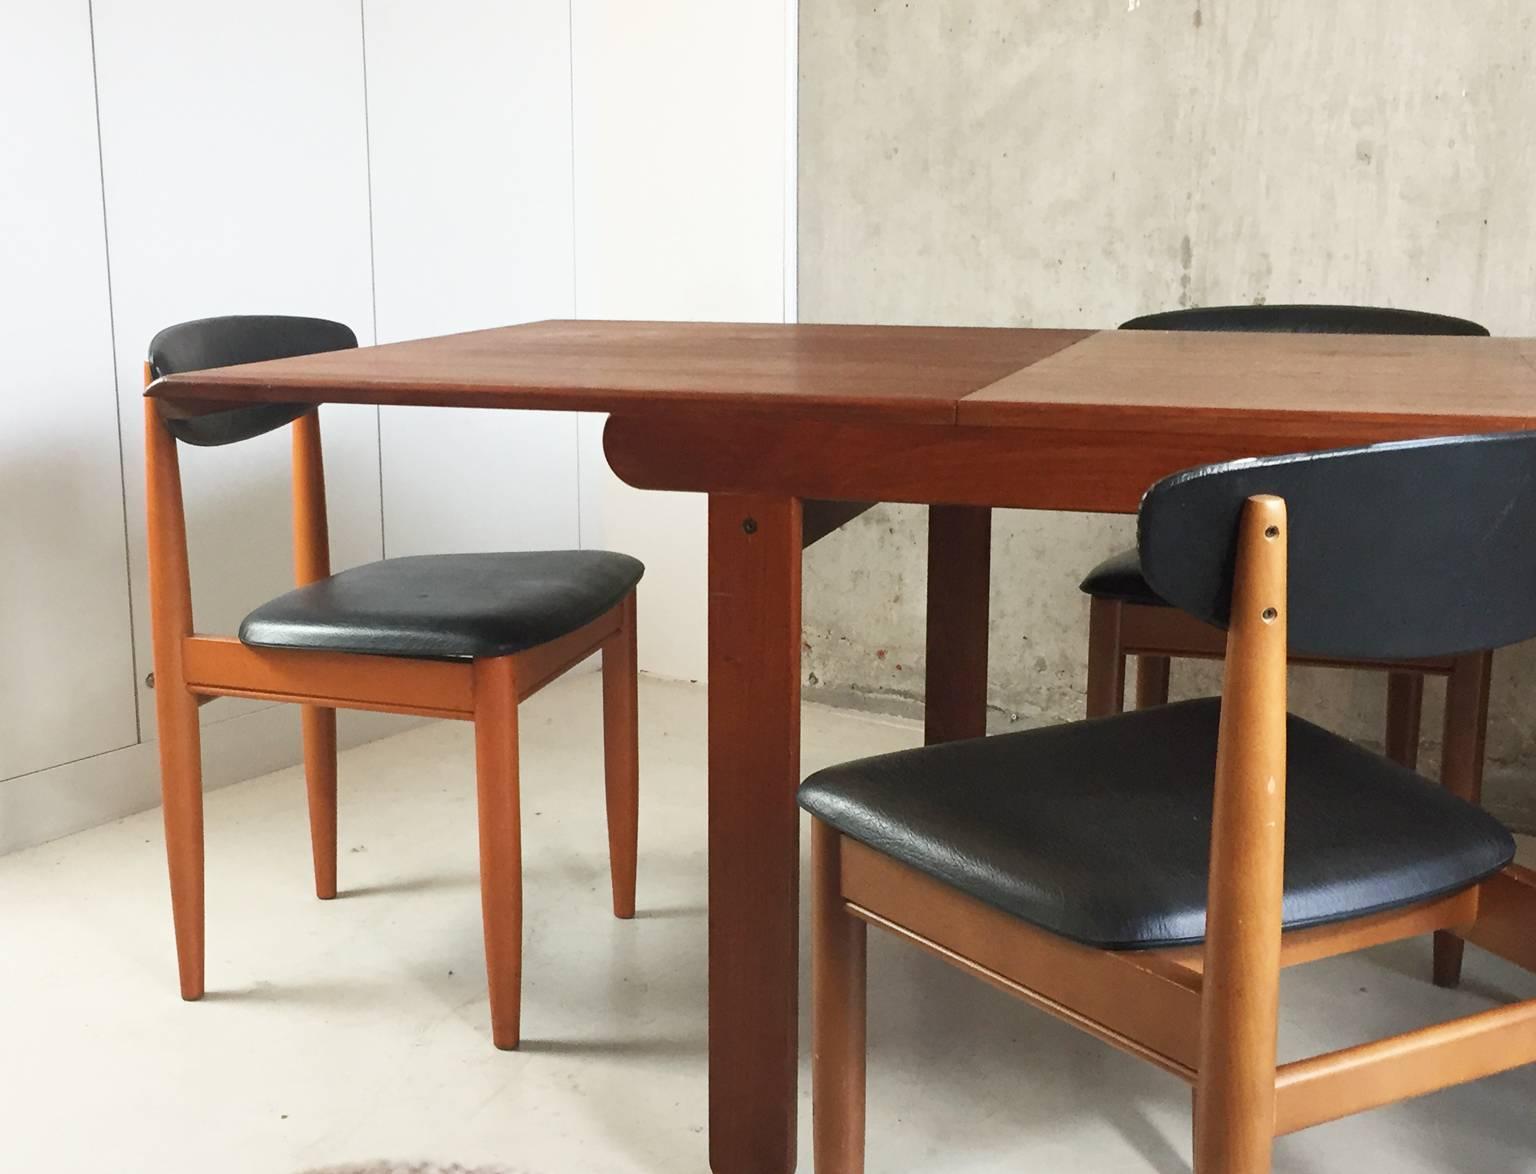 A really substantial 1970s dark teak table with six black vinyl upholstered dining chairs. The teak is dark and rich with a lovely grain. The table has distinctive ‘flat’ legs and rounded edges. A nice detail is the under lip on each end of the